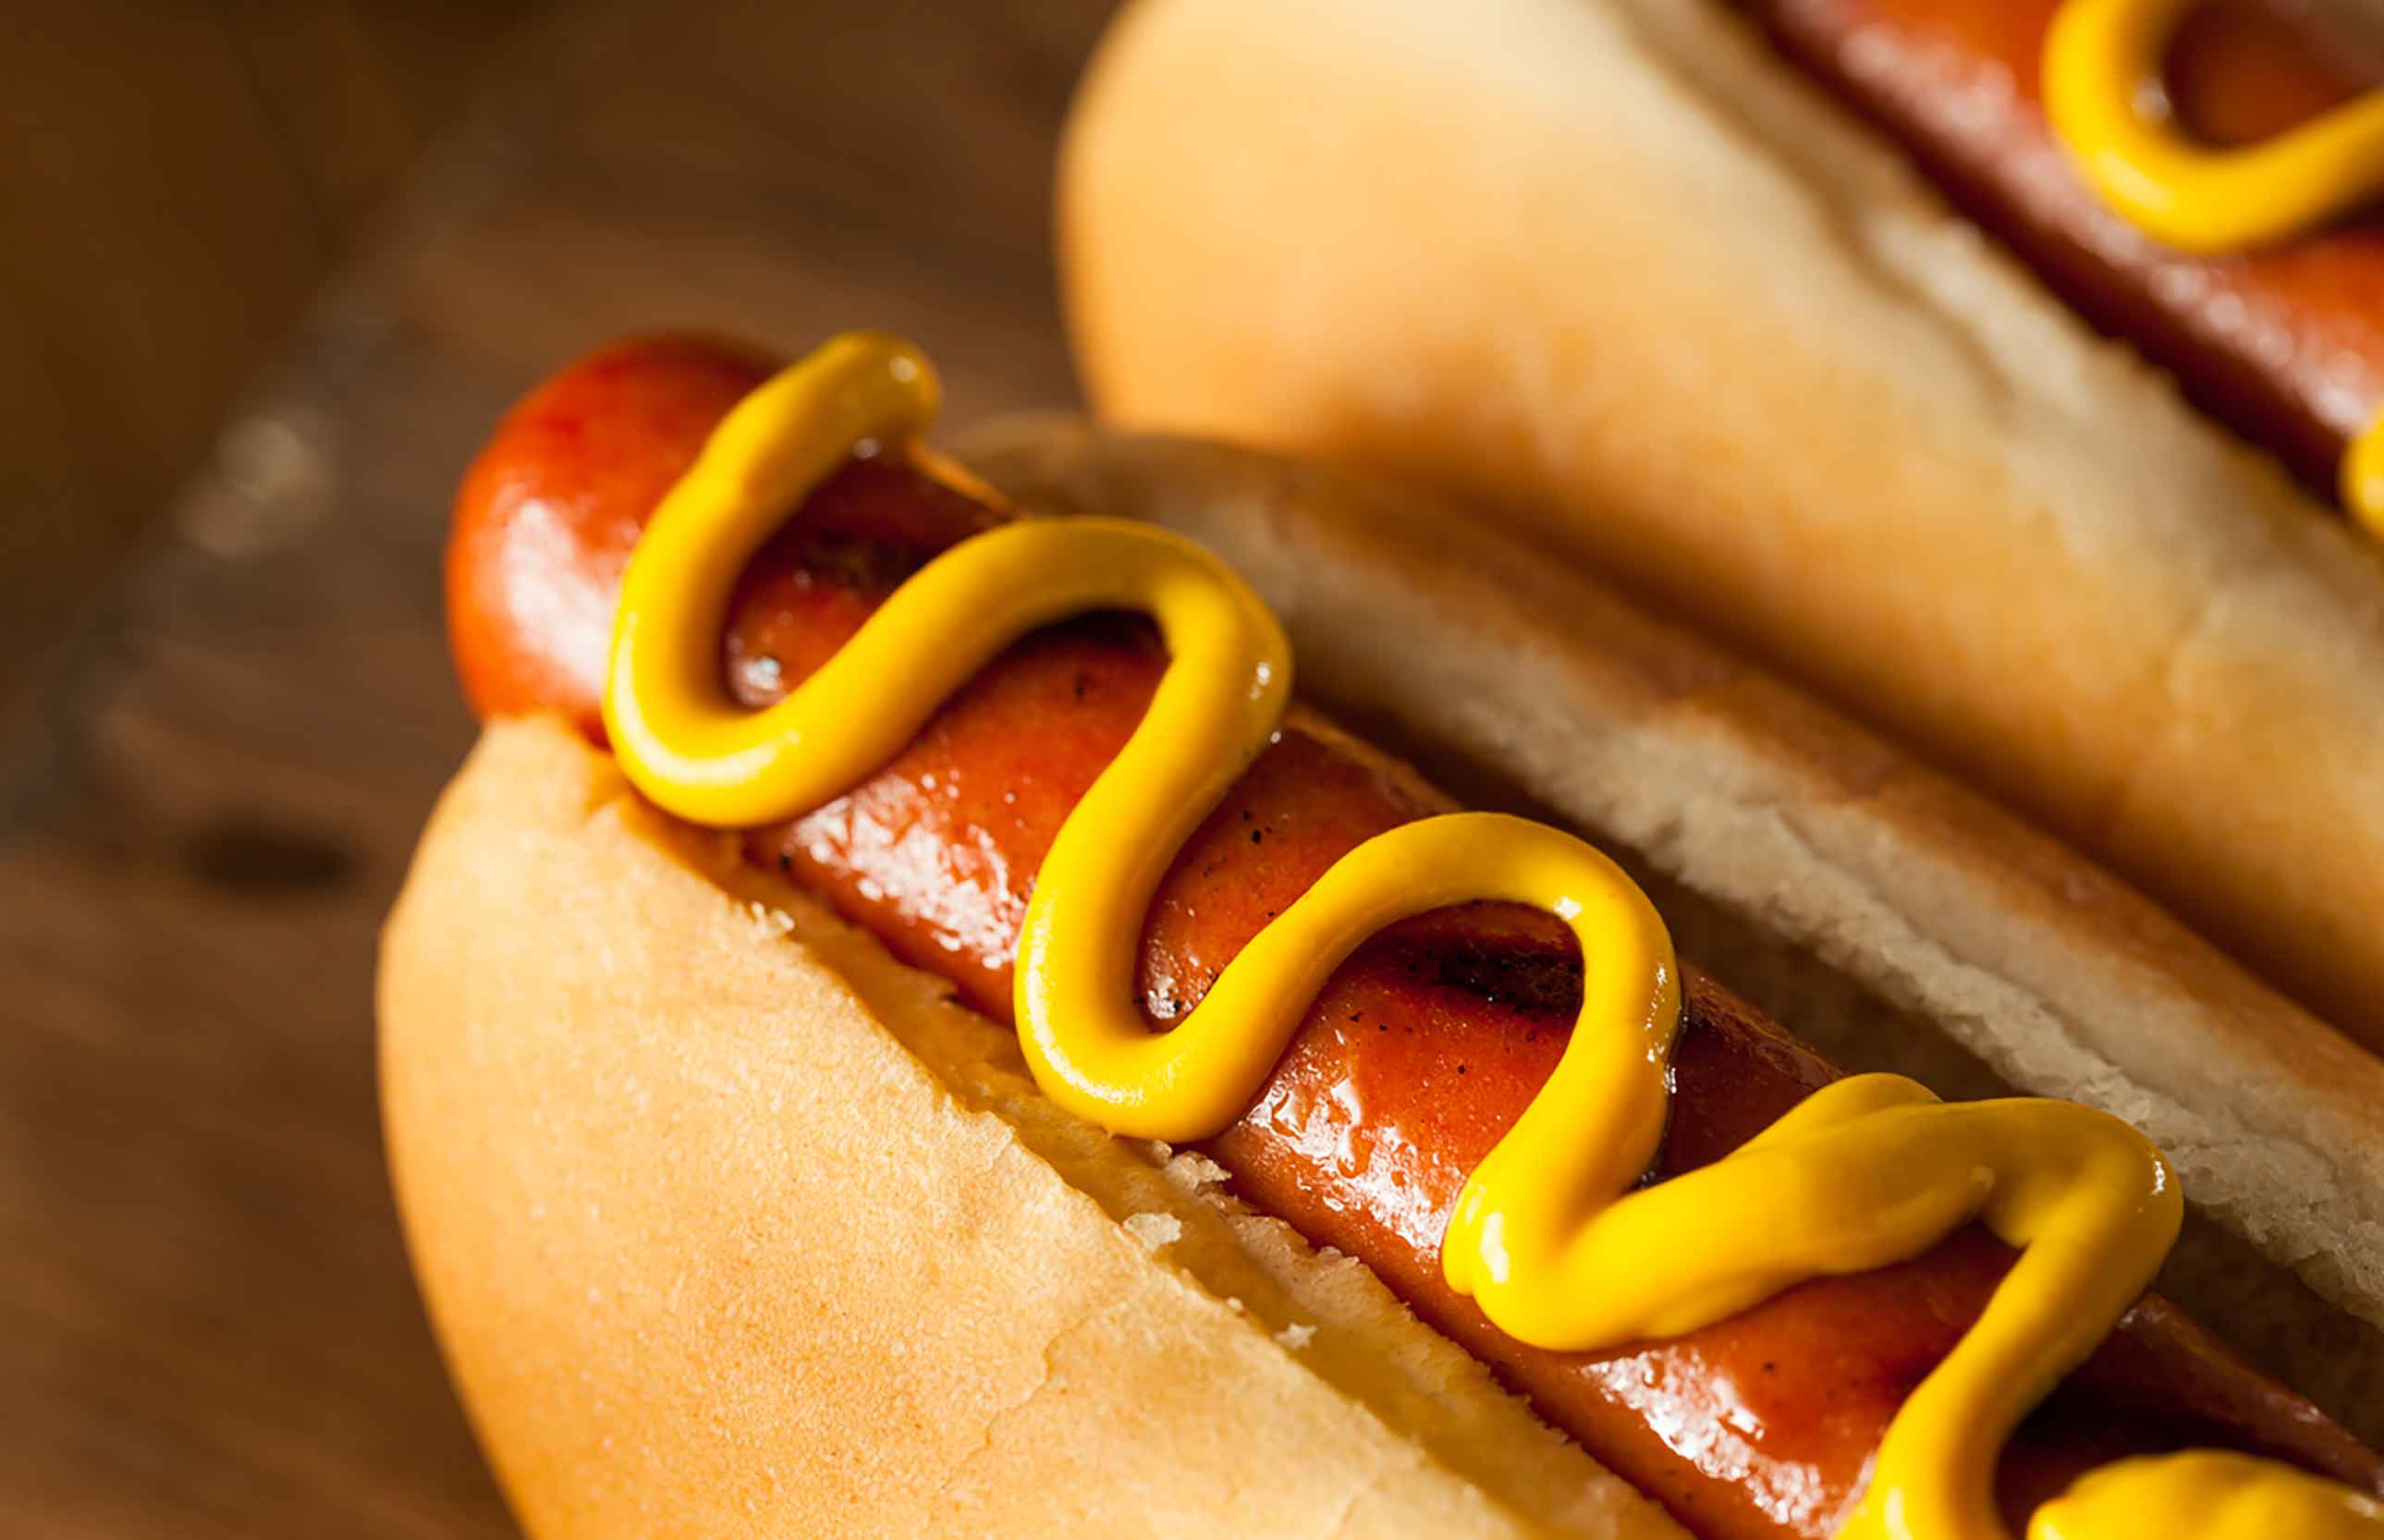 See which stadiums offer you the most hot dog bang for your buck.